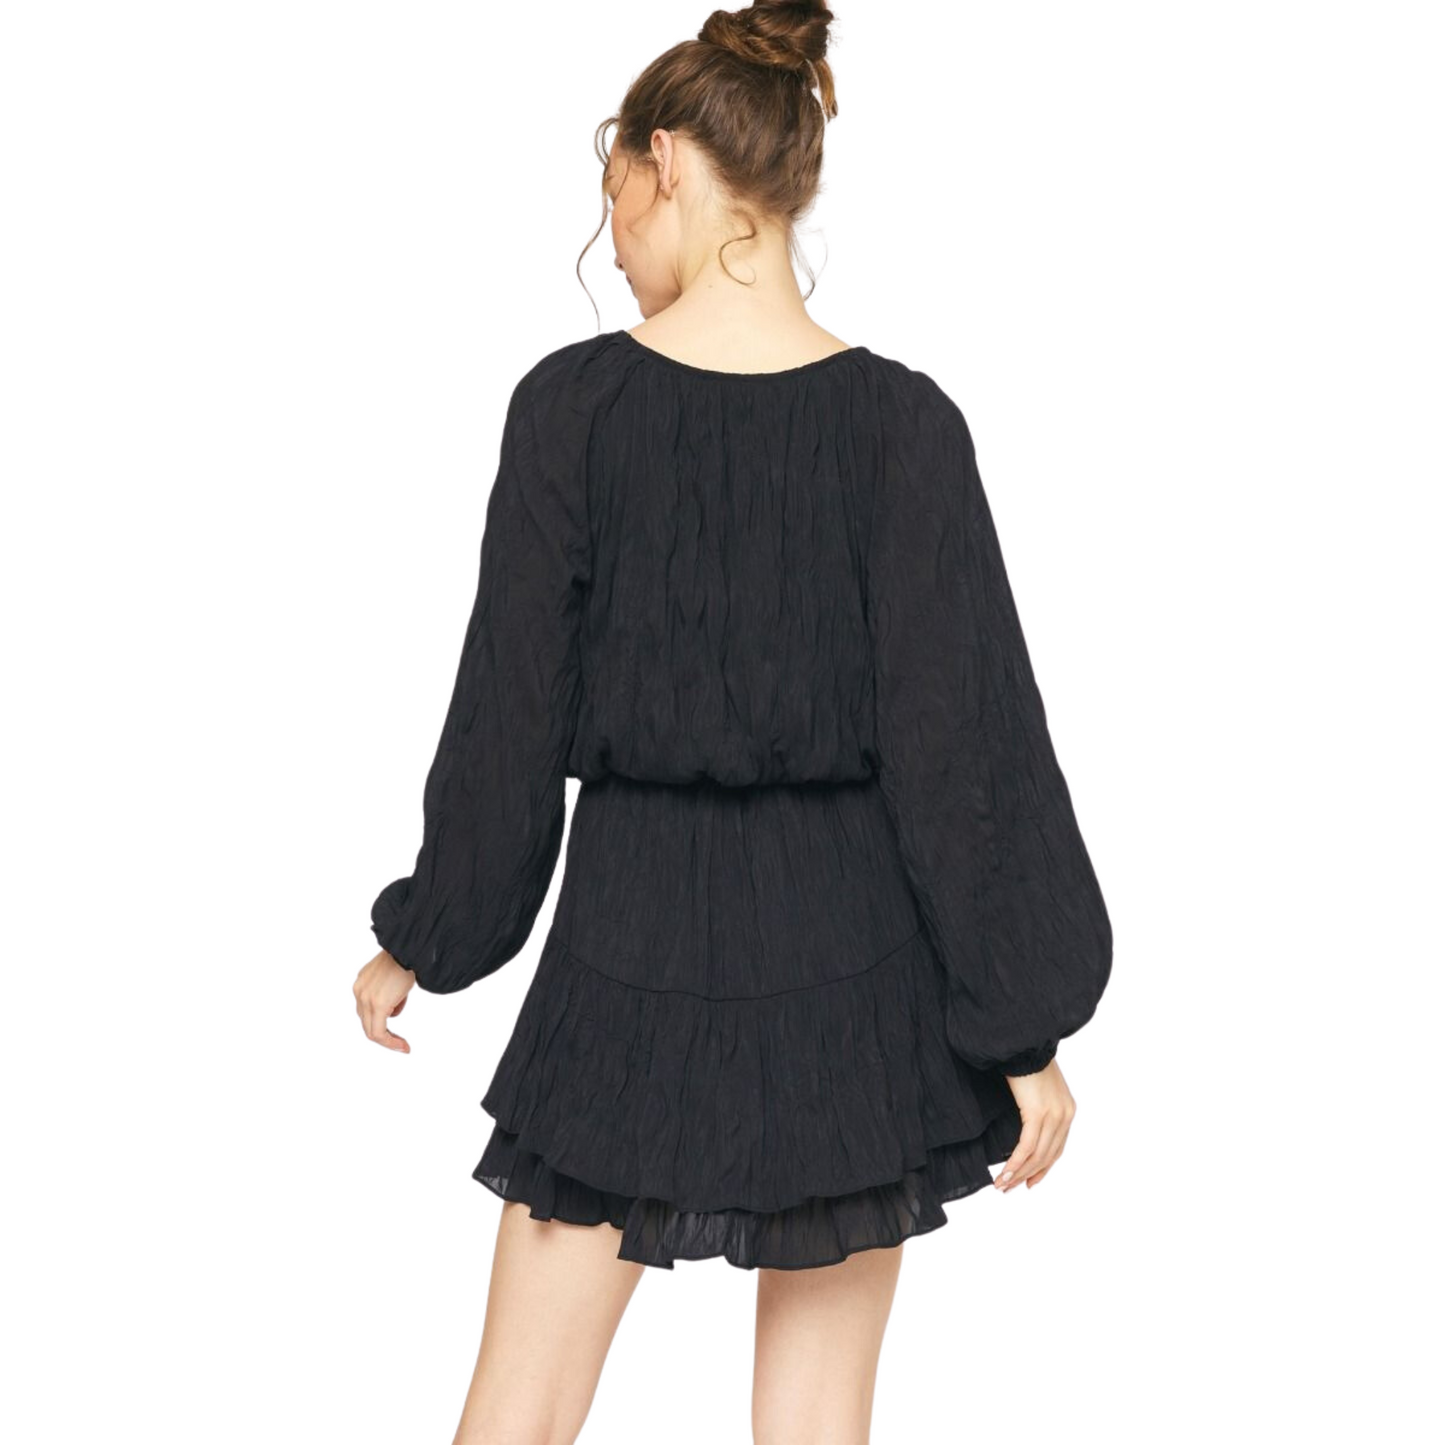 This fashionable long sleeve mini dress is perfect for any occasion. Crafted with textured fabric in classic black and featuring a stylish ruffled hem, a self-tie waist detail and a button-up front, this mini dress will look great on any figure. Lightweight and non-sheer, the dress is also fully lined for a comfortable fit.